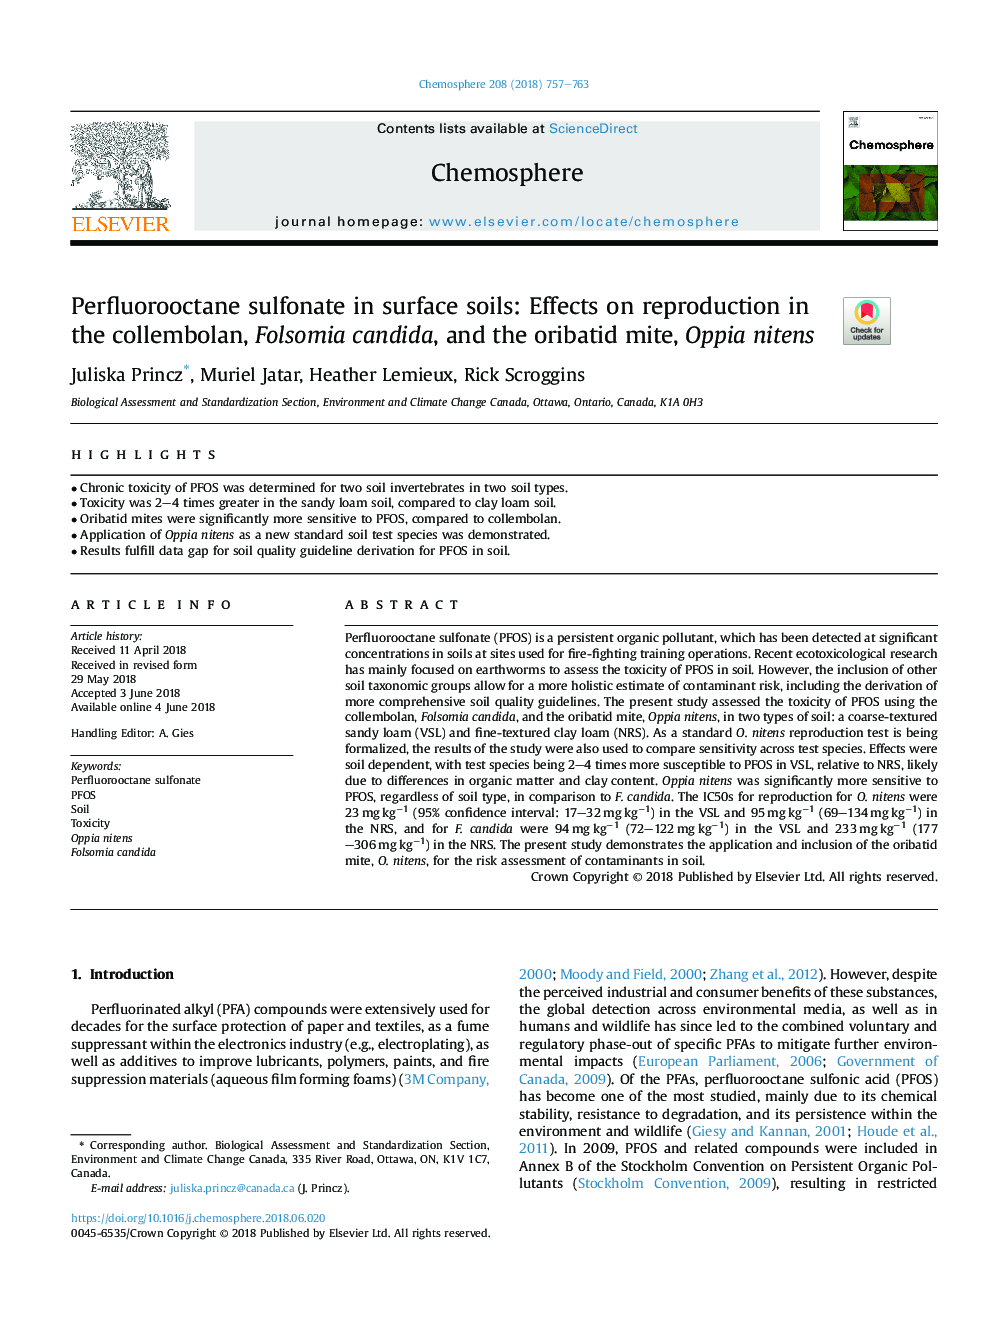 Perfluorooctane sulfonate in surface soils: Effects on reproduction in the collembolan, Folsomia candida, and the oribatid mite, Oppia nitens